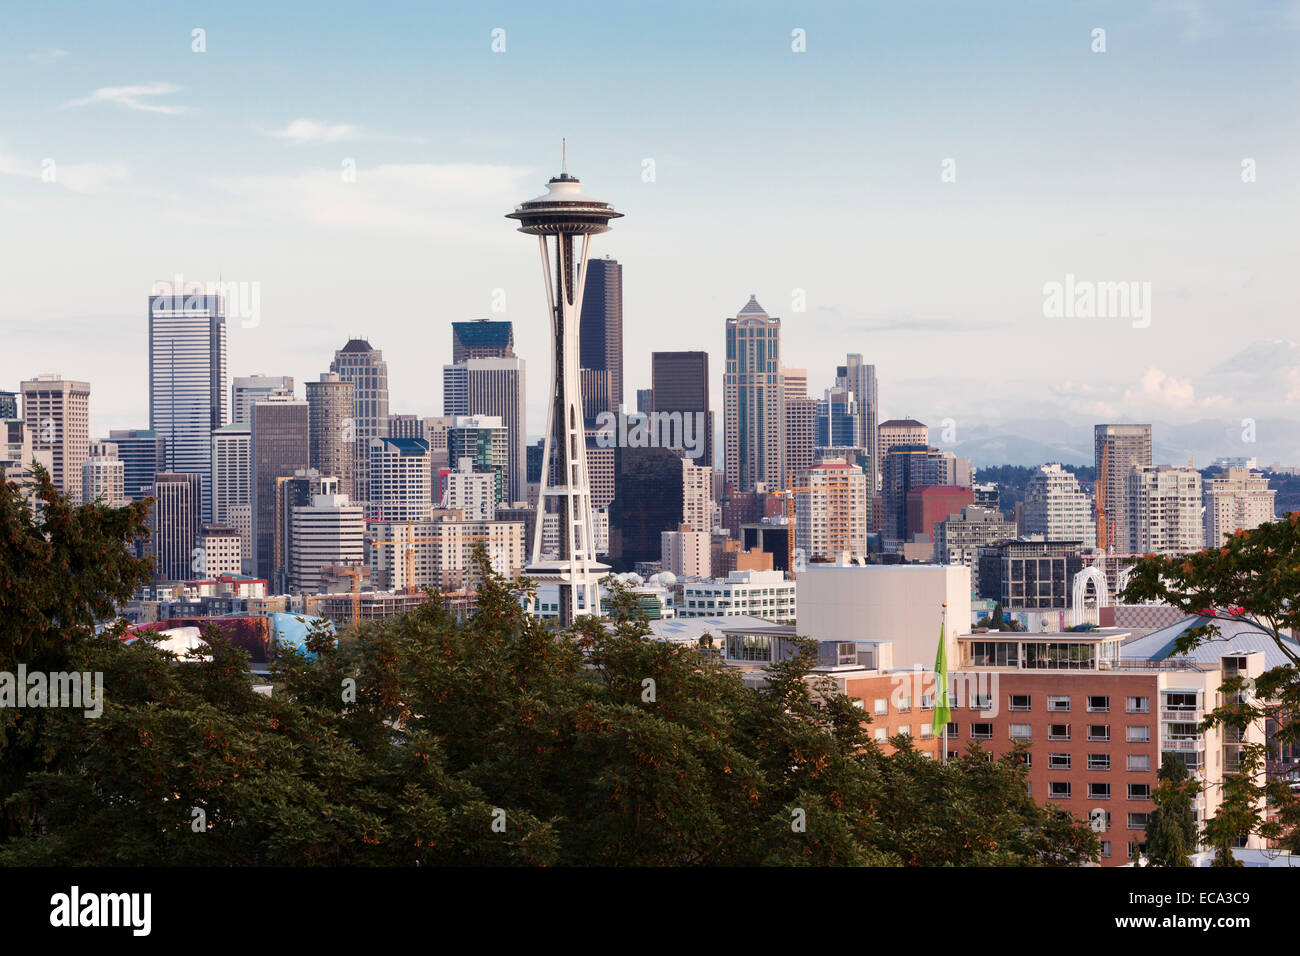 Skyline of Downtown Seattle with the Space Needle and Mt Rainier, Seattle, Washington, United States Stock Photo